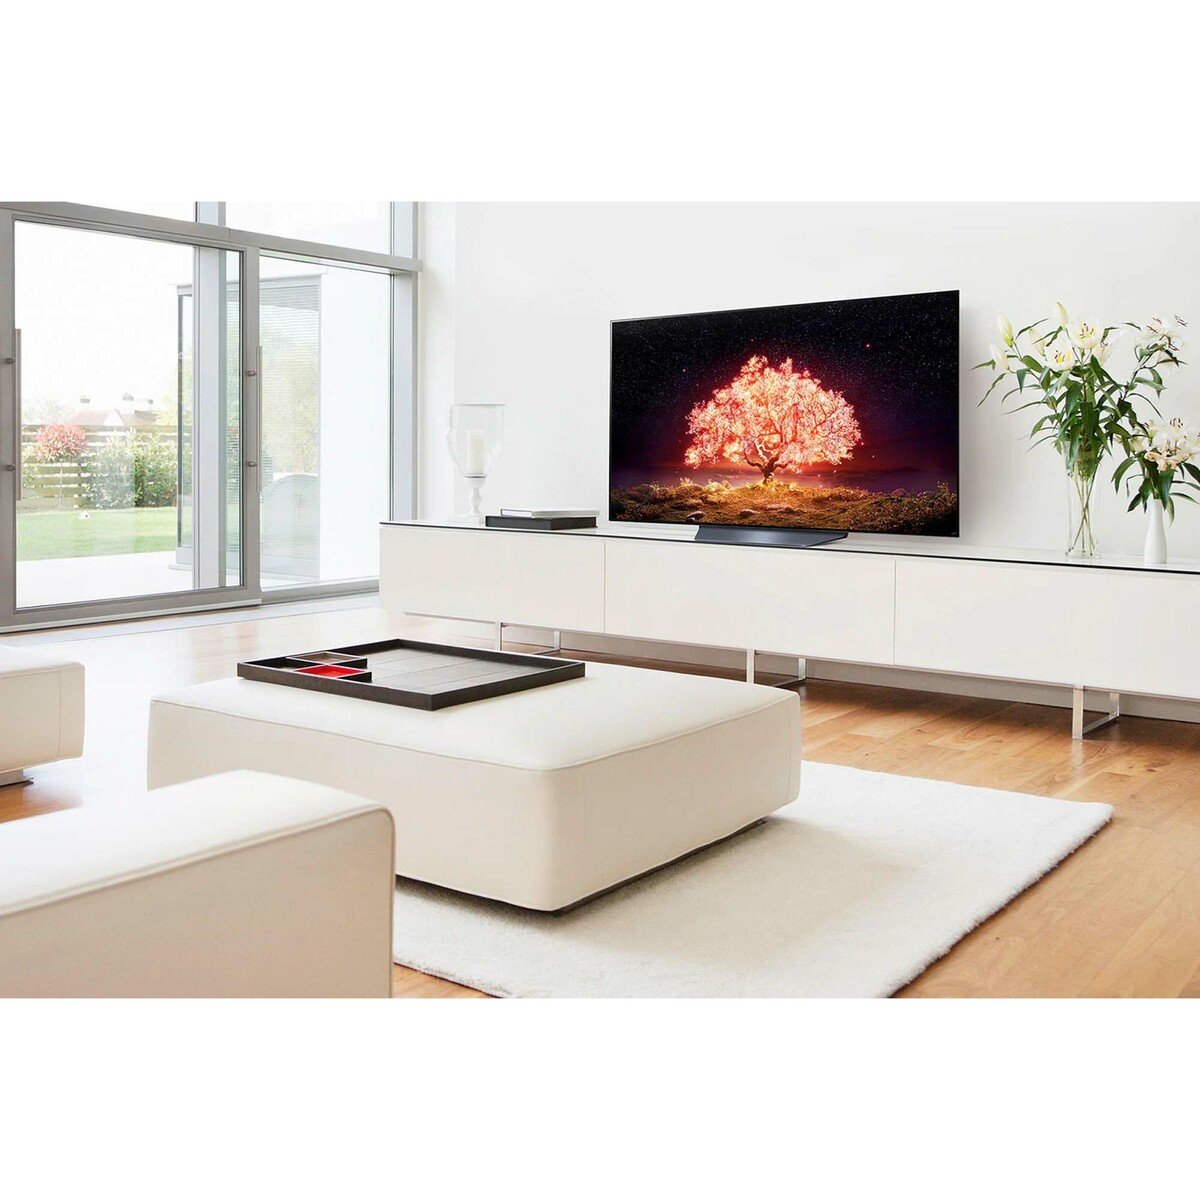 LG OLED 4K Smart TV 55 Inch B1 Series Cinema Screen Design, New 2021 4K Cinema HDR webOS Smart with ThinQ AI Pixel Dimming